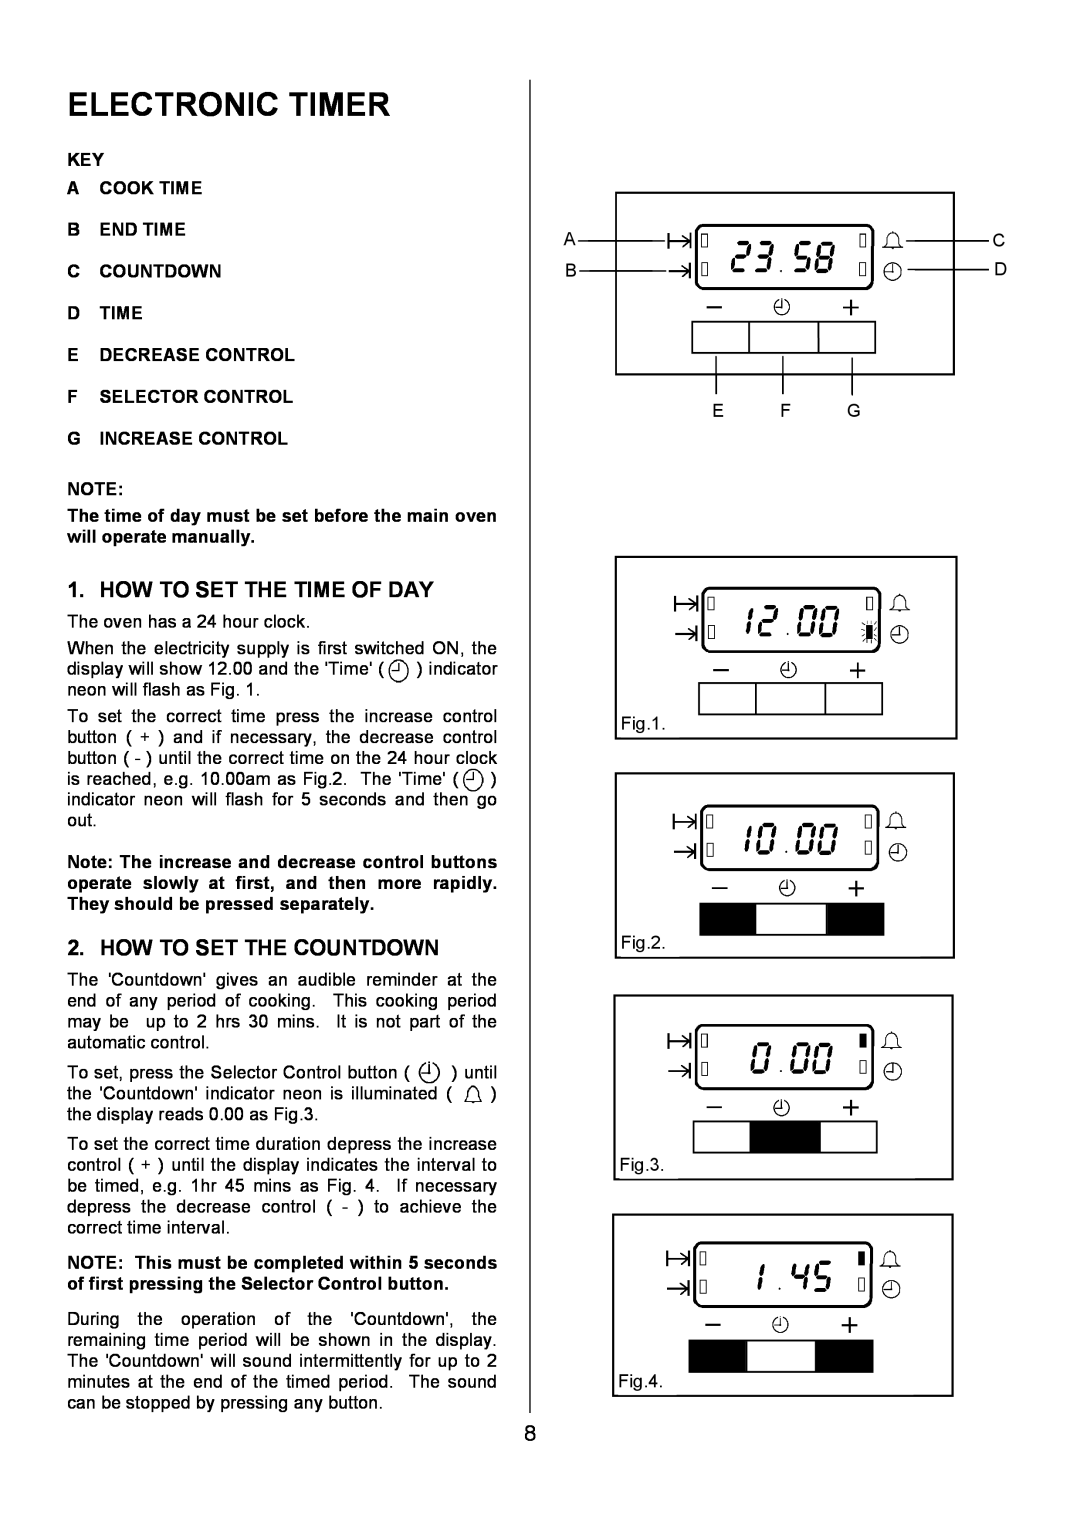 AEG U7101-4, 311704300 manual Electronic Timer, How To Set The Time Of Day, How To Set The Countdown 